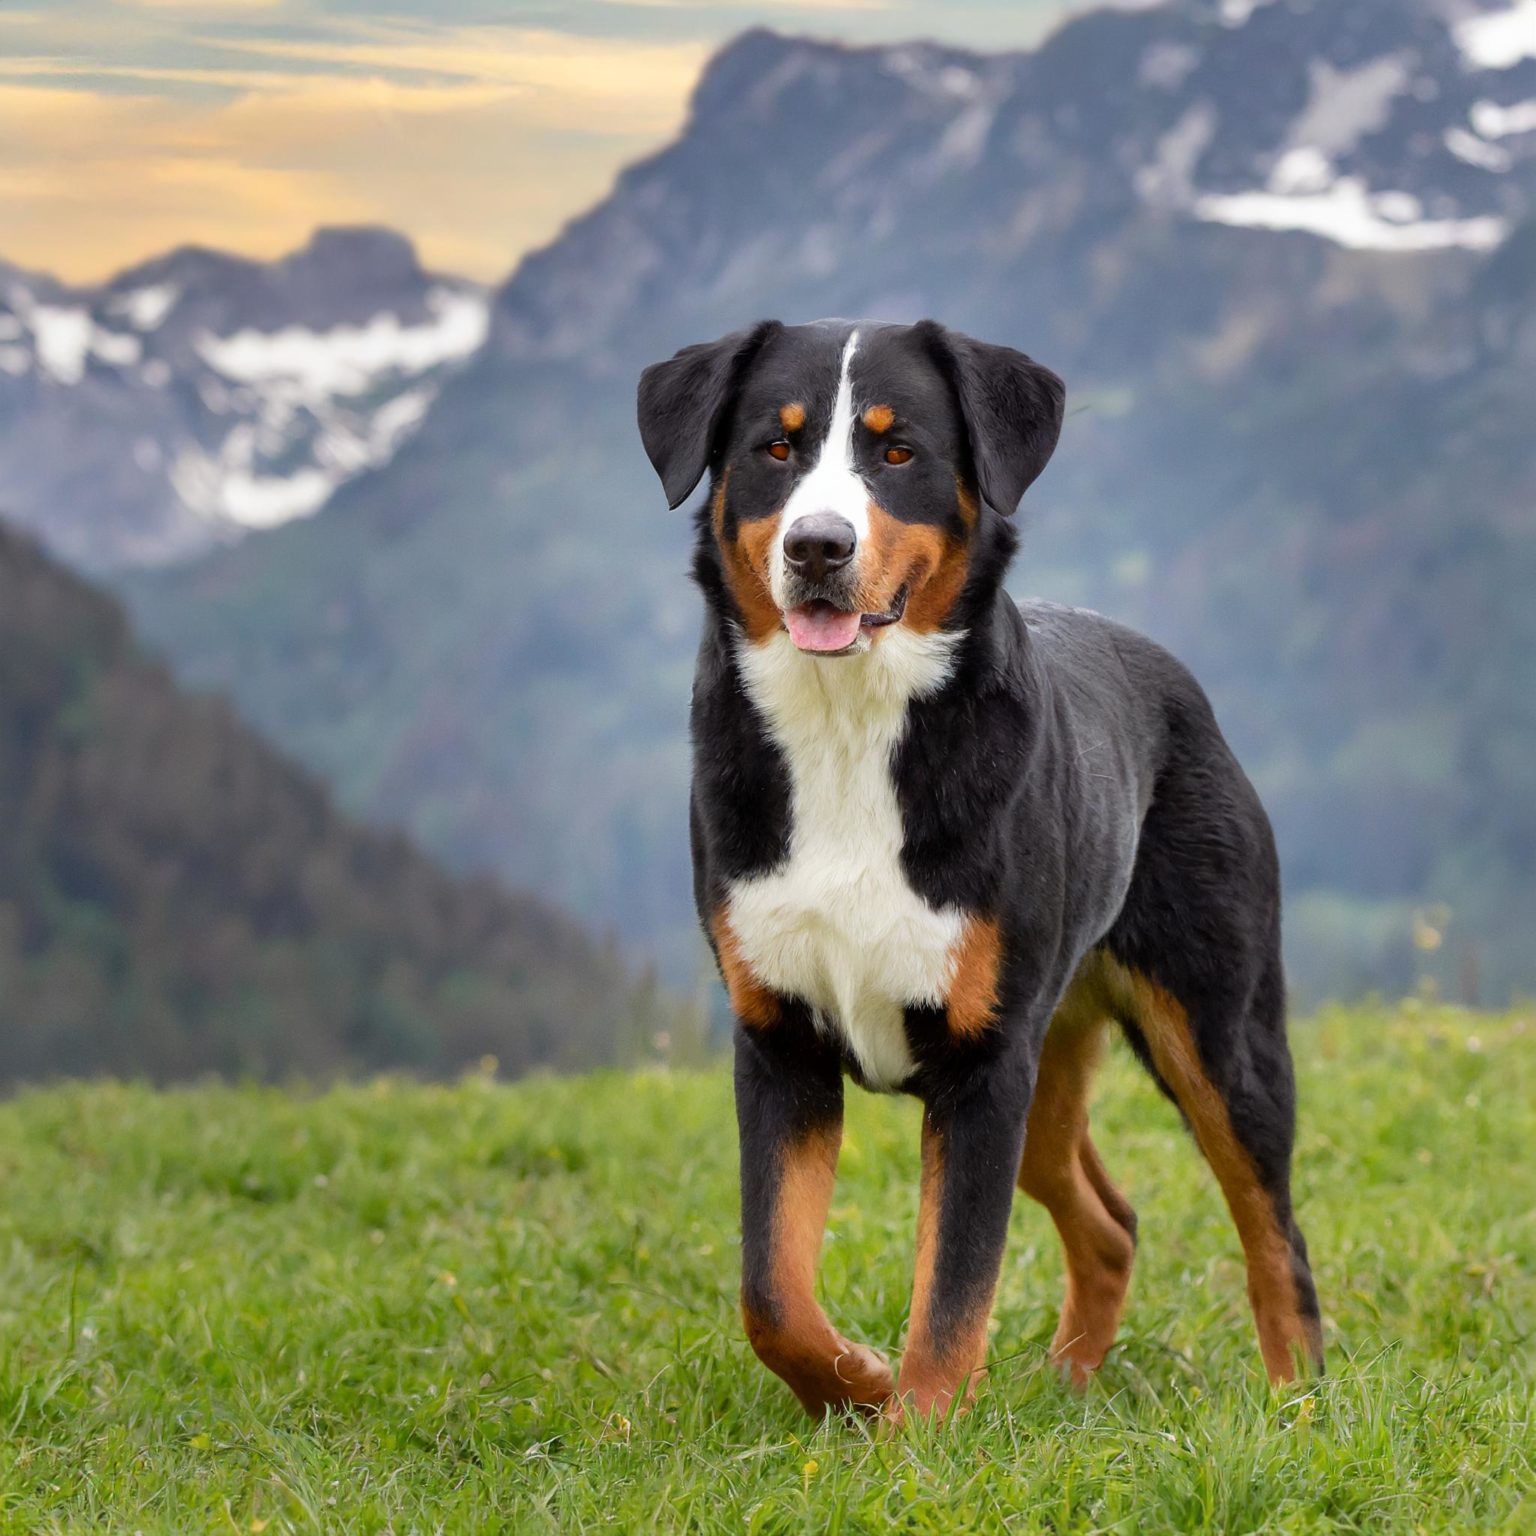 The Appenzeller Sennenhund exploring nature to release any excessive energy